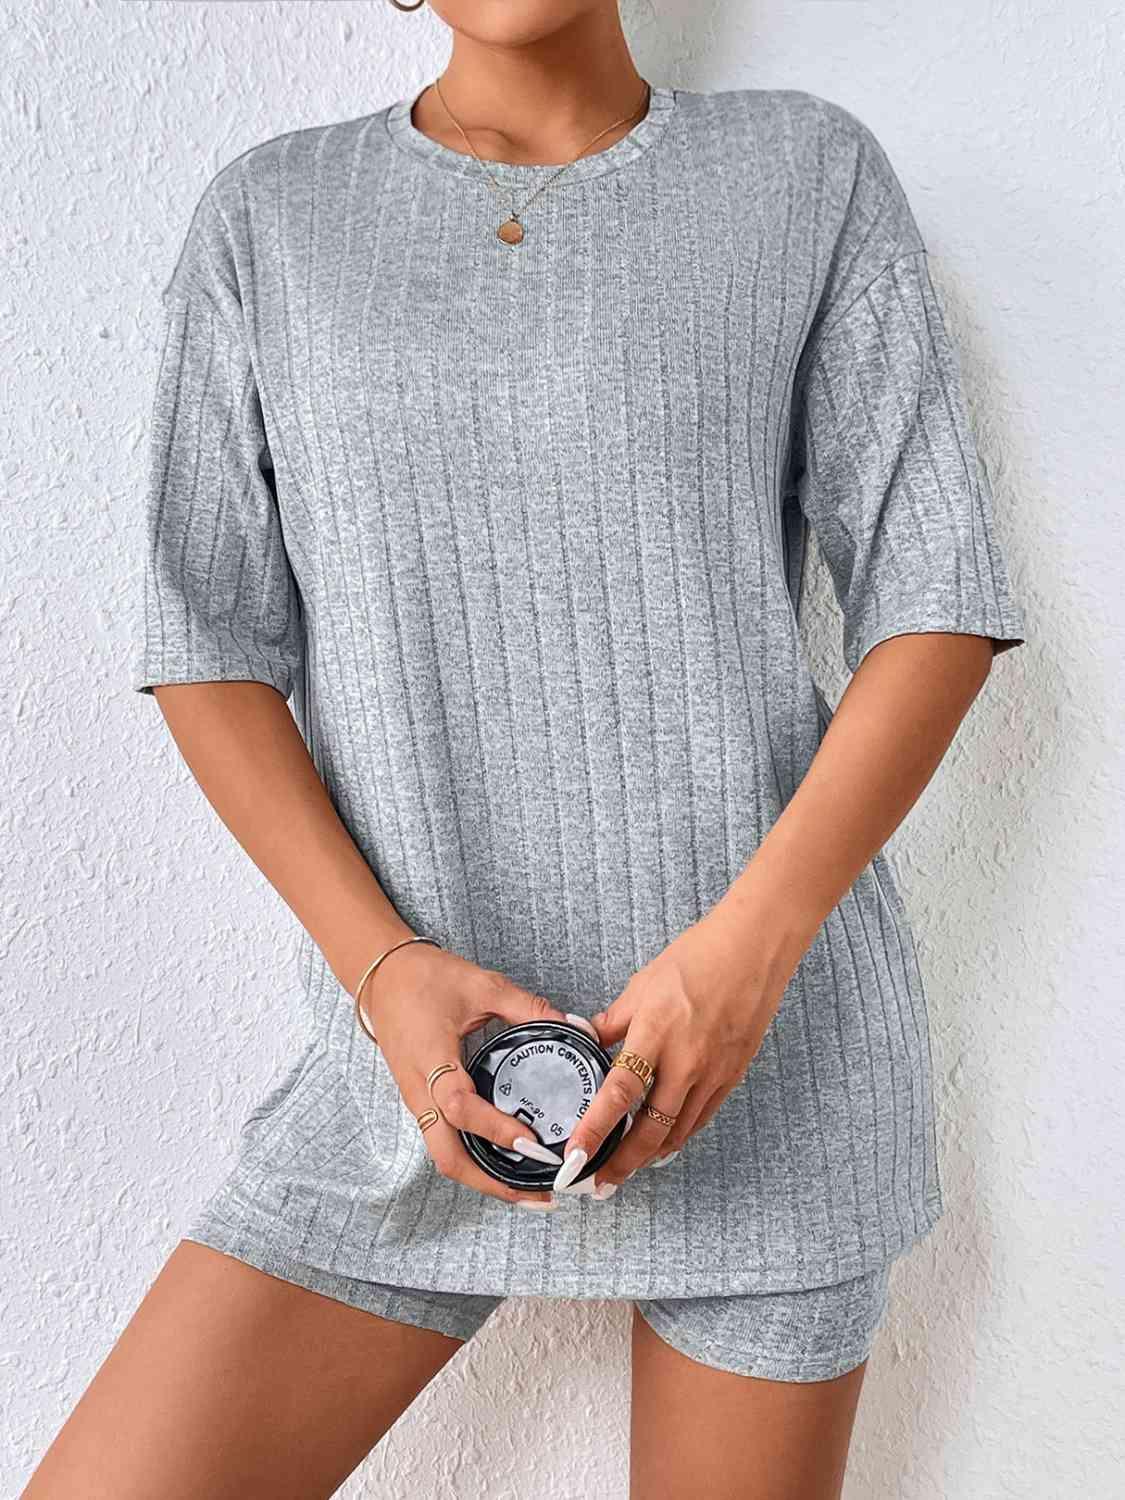 a woman wearing a gray sweater and shorts